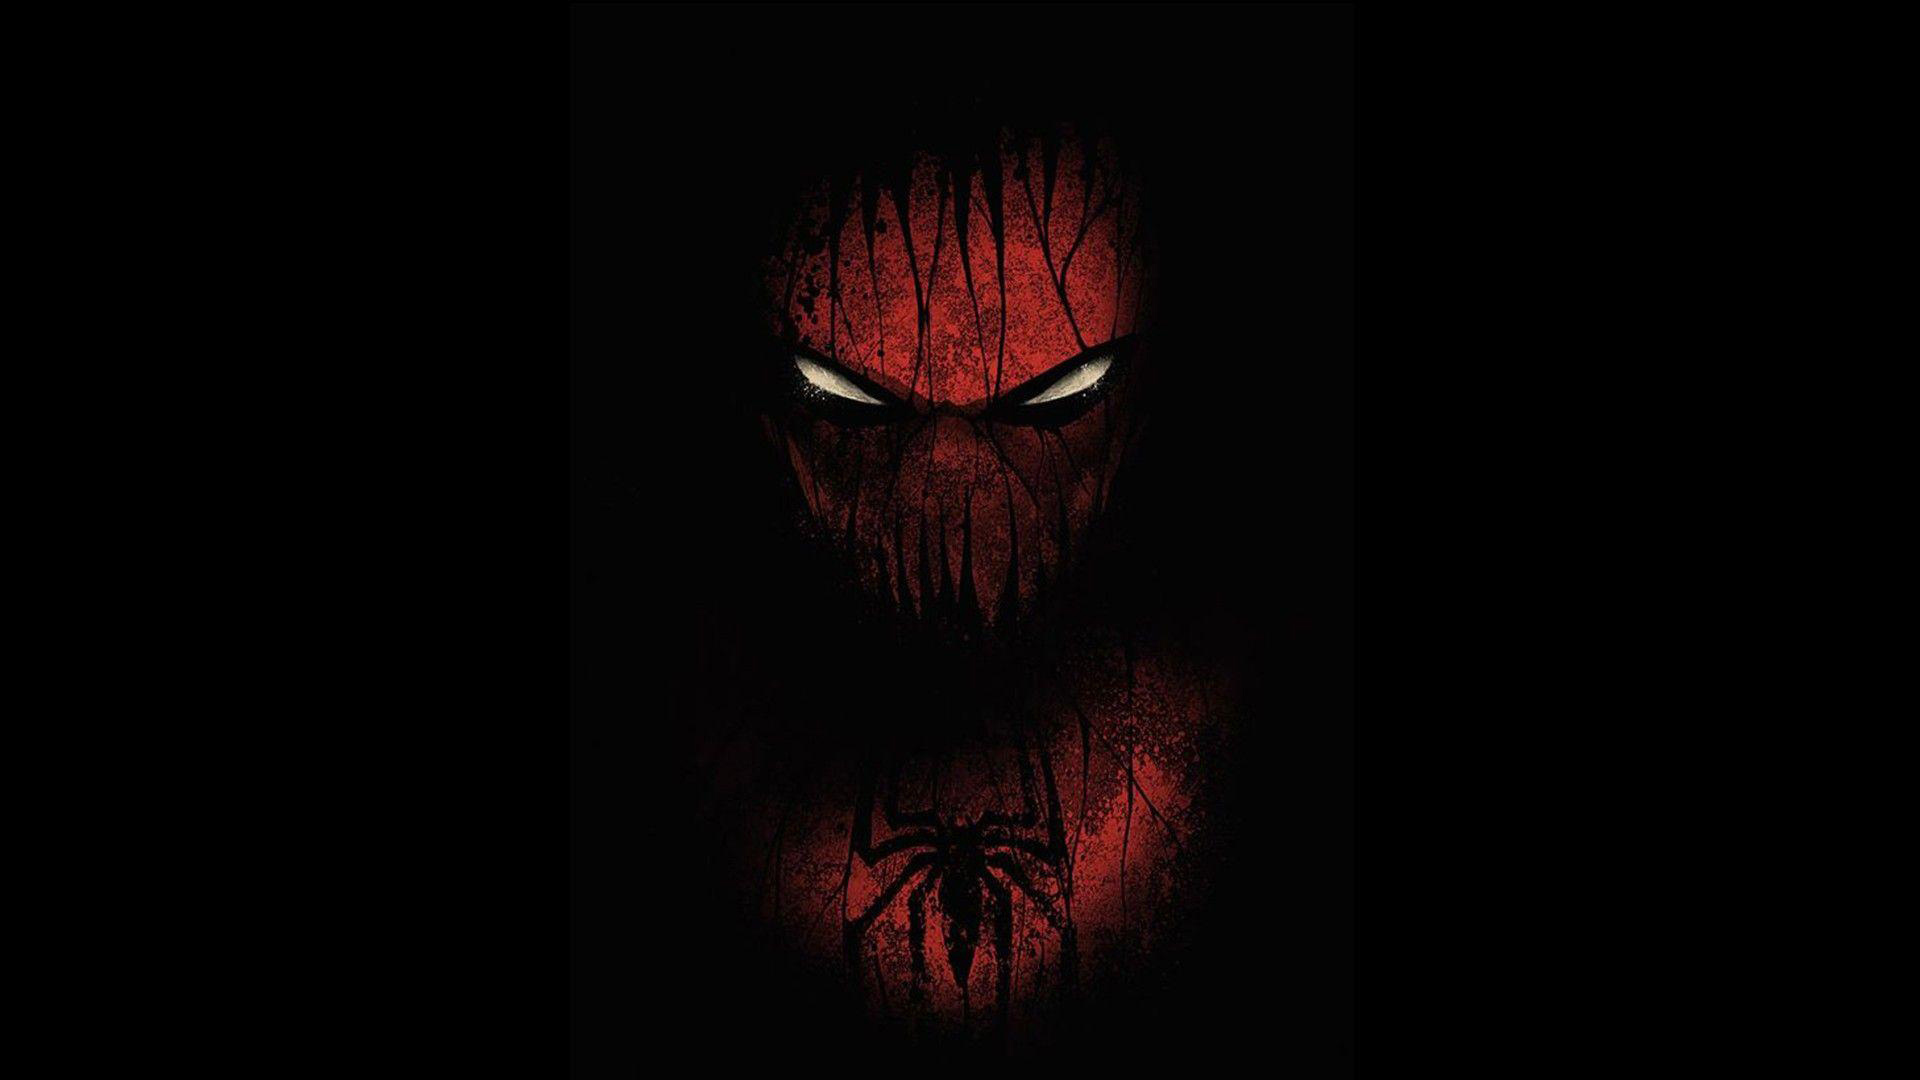 Red Spider Face Mask In Black Wallpaper HD Badass